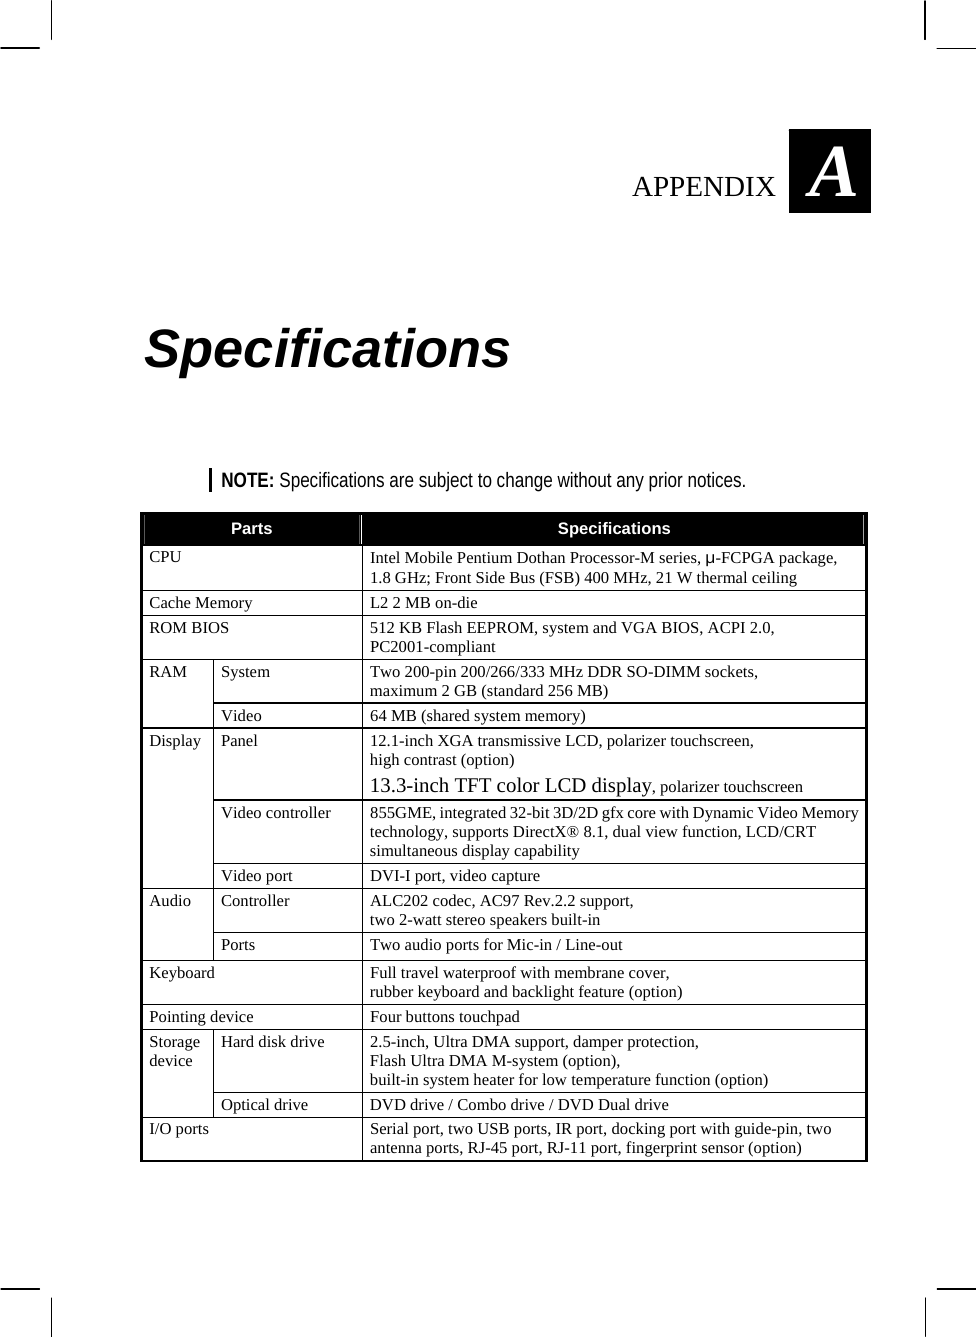  AAPPENDIX  Specifications NOTE: Specifications are subject to change without any prior notices.  Parts  Specifications CPU  Intel Mobile Pentium Dothan Processor-M series, µ-FCPGA package, 1.8 GHz; Front Side Bus (FSB) 400 MHz, 21 W thermal ceiling Cache Memory  L2 2 MB on-die ROM BIOS  512 KB Flash EEPROM, system and VGA BIOS, ACPI 2.0, PC2001-compliant System  Two 200-pin 200/266/333 MHz DDR SO-DIMM sockets, maximum 2 GB (standard 256 MB) RAM Video  64 MB (shared system memory) Panel  12.1-inch XGA transmissive LCD, polarizer touchscreen, high contrast (option)  13.3-inch TFT color LCD display, polarizer touchscreen Video controller  855GME, integrated 32-bit 3D/2D gfx core with Dynamic Video Memory technology, supports DirectX® 8.1, dual view function, LCD/CRT simultaneous display capability Display Video port  DVI-I port, video capture Controller  ALC202 codec, AC97 Rev.2.2 support, two 2-watt stereo speakers built-in Audio Ports  Two audio ports for Mic-in / Line-out Keyboard  Full travel waterproof with membrane cover, rubber keyboard and backlight feature (option) Pointing device  Four buttons touchpad Hard disk drive  2.5-inch, Ultra DMA support, damper protection, Flash Ultra DMA M-system (option), built-in system heater for low temperature function (option) Storage device Optical drive  DVD drive / Combo drive / DVD Dual drive I/O ports  Serial port, two USB ports, IR port, docking port with guide-pin, two antenna ports, RJ-45 port, RJ-11 port, fingerprint sensor (option)  